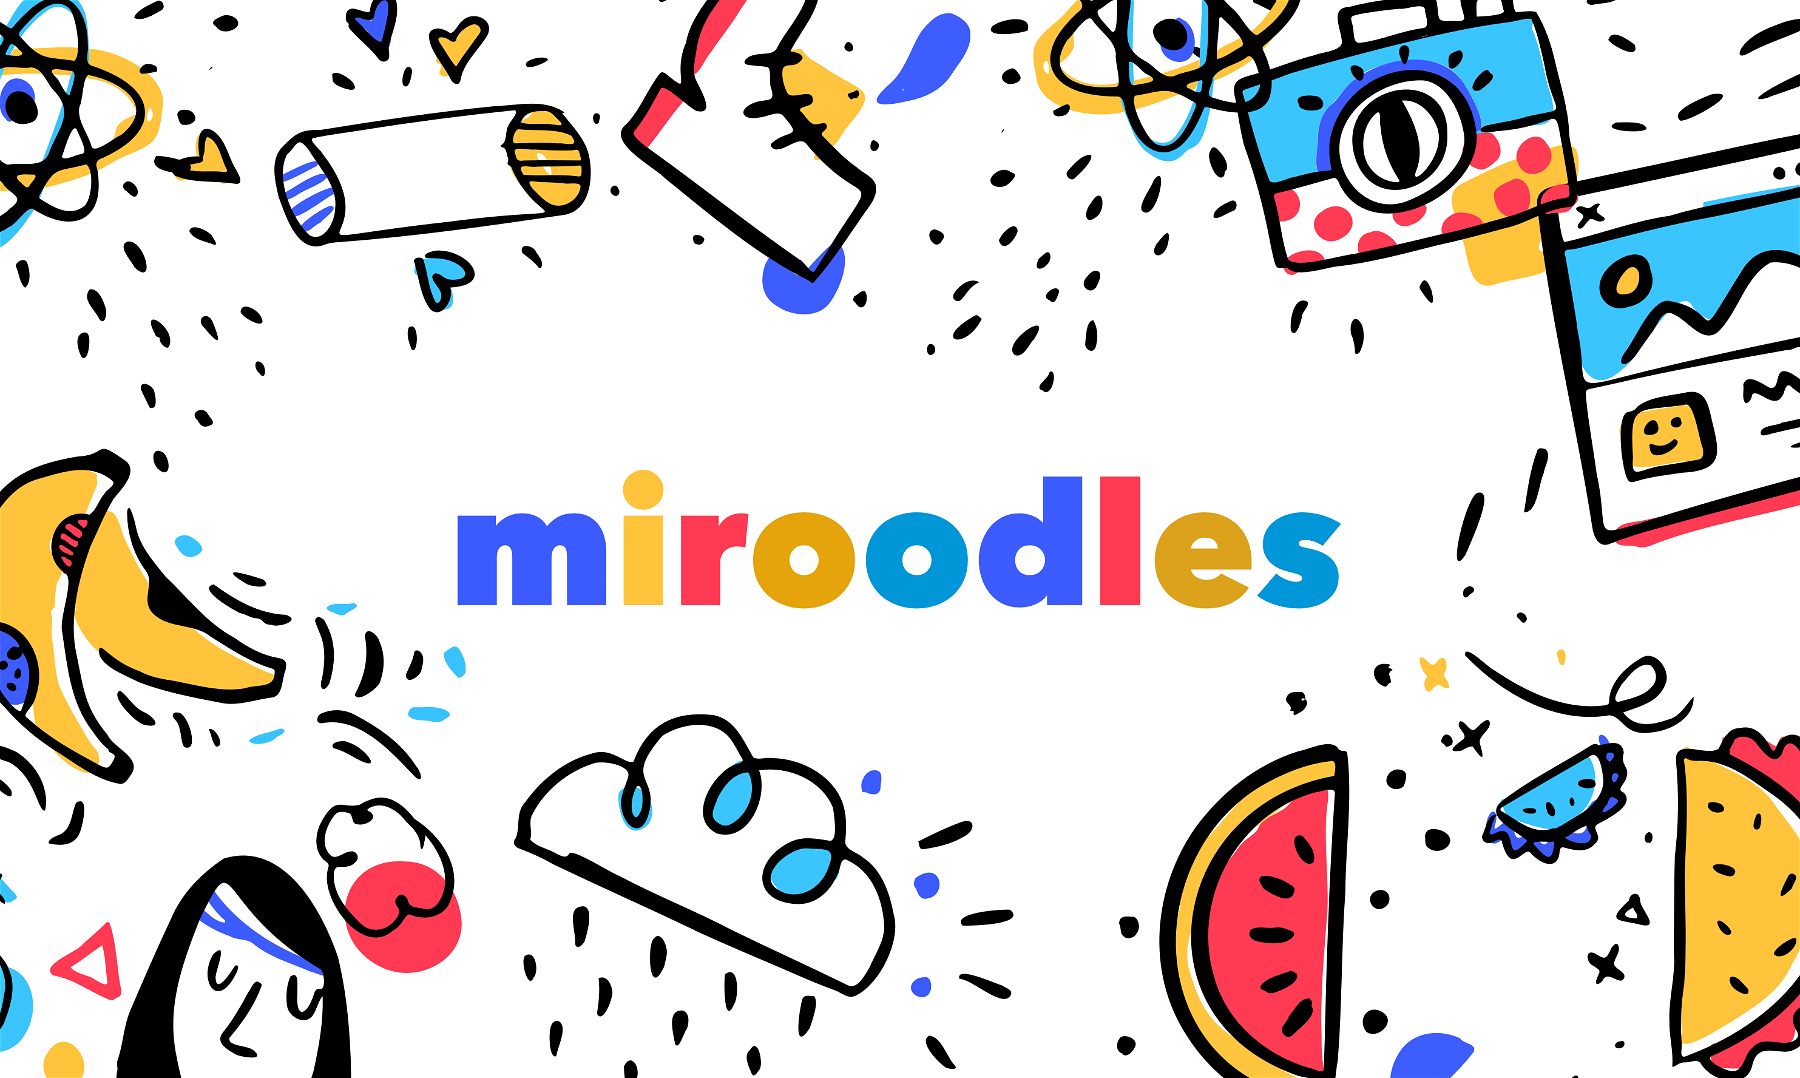 Miroodles